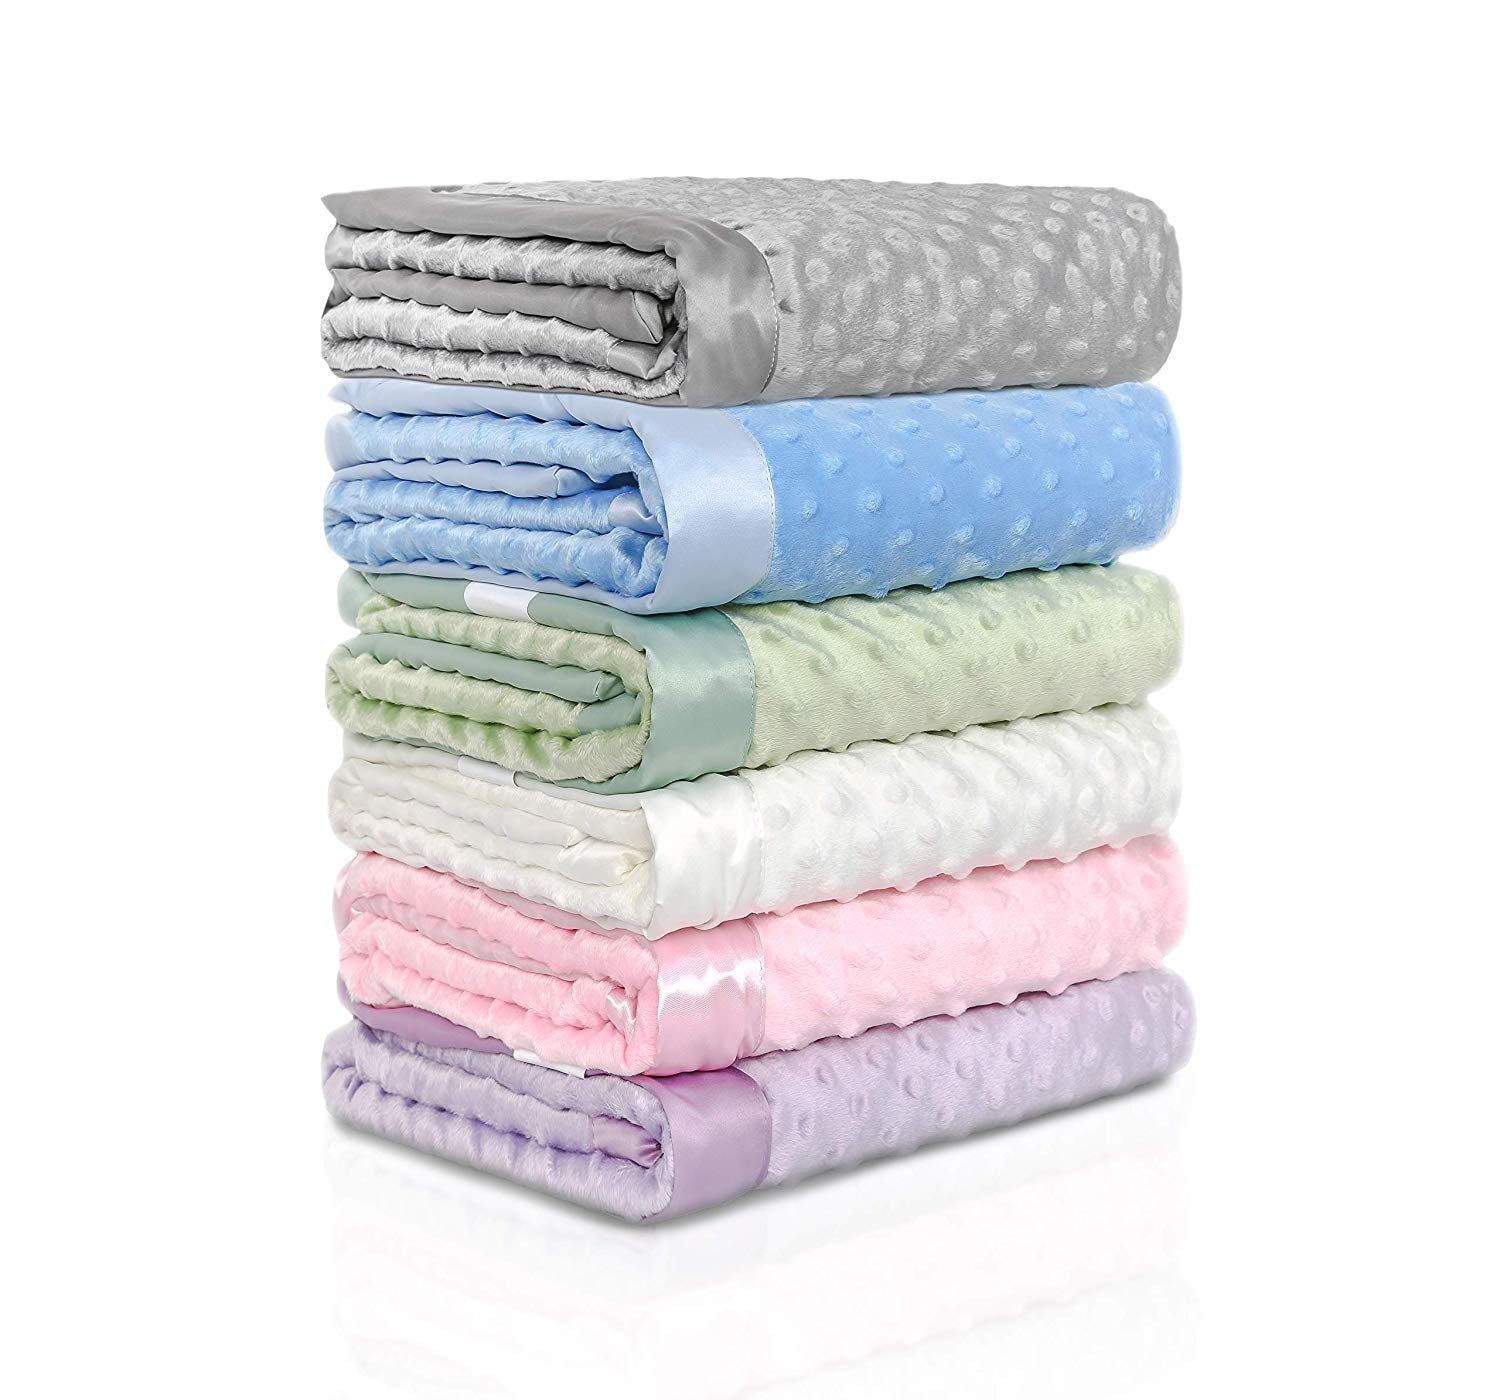 a pile of soft minky baby blankets with dotted backing and silky trim. They are various pastel colors and look really soft!